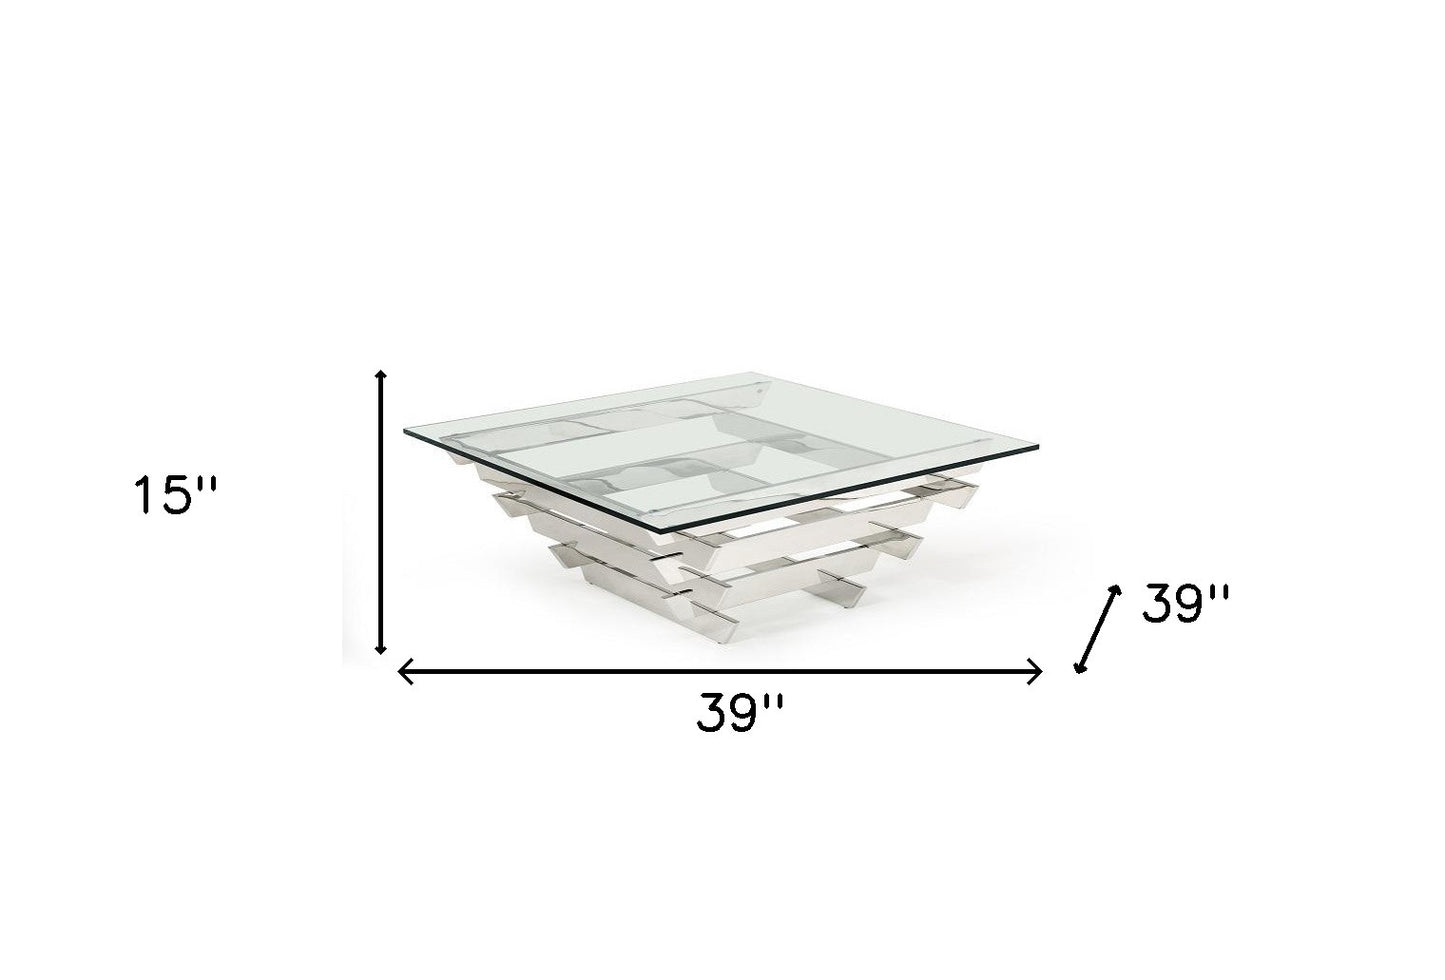 39" Glass Square Coffee Table